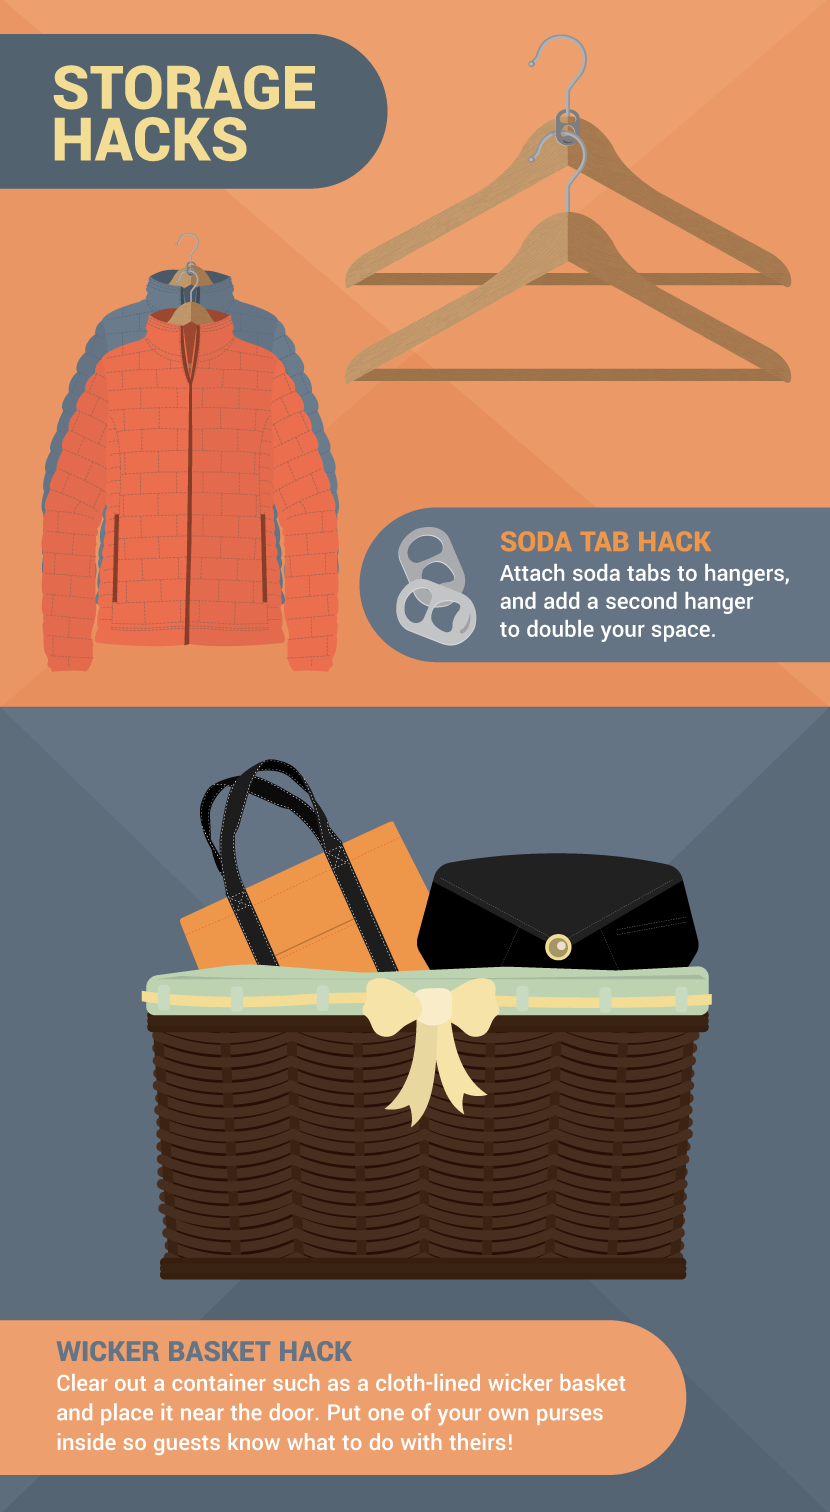 Storage Hacks For a Party